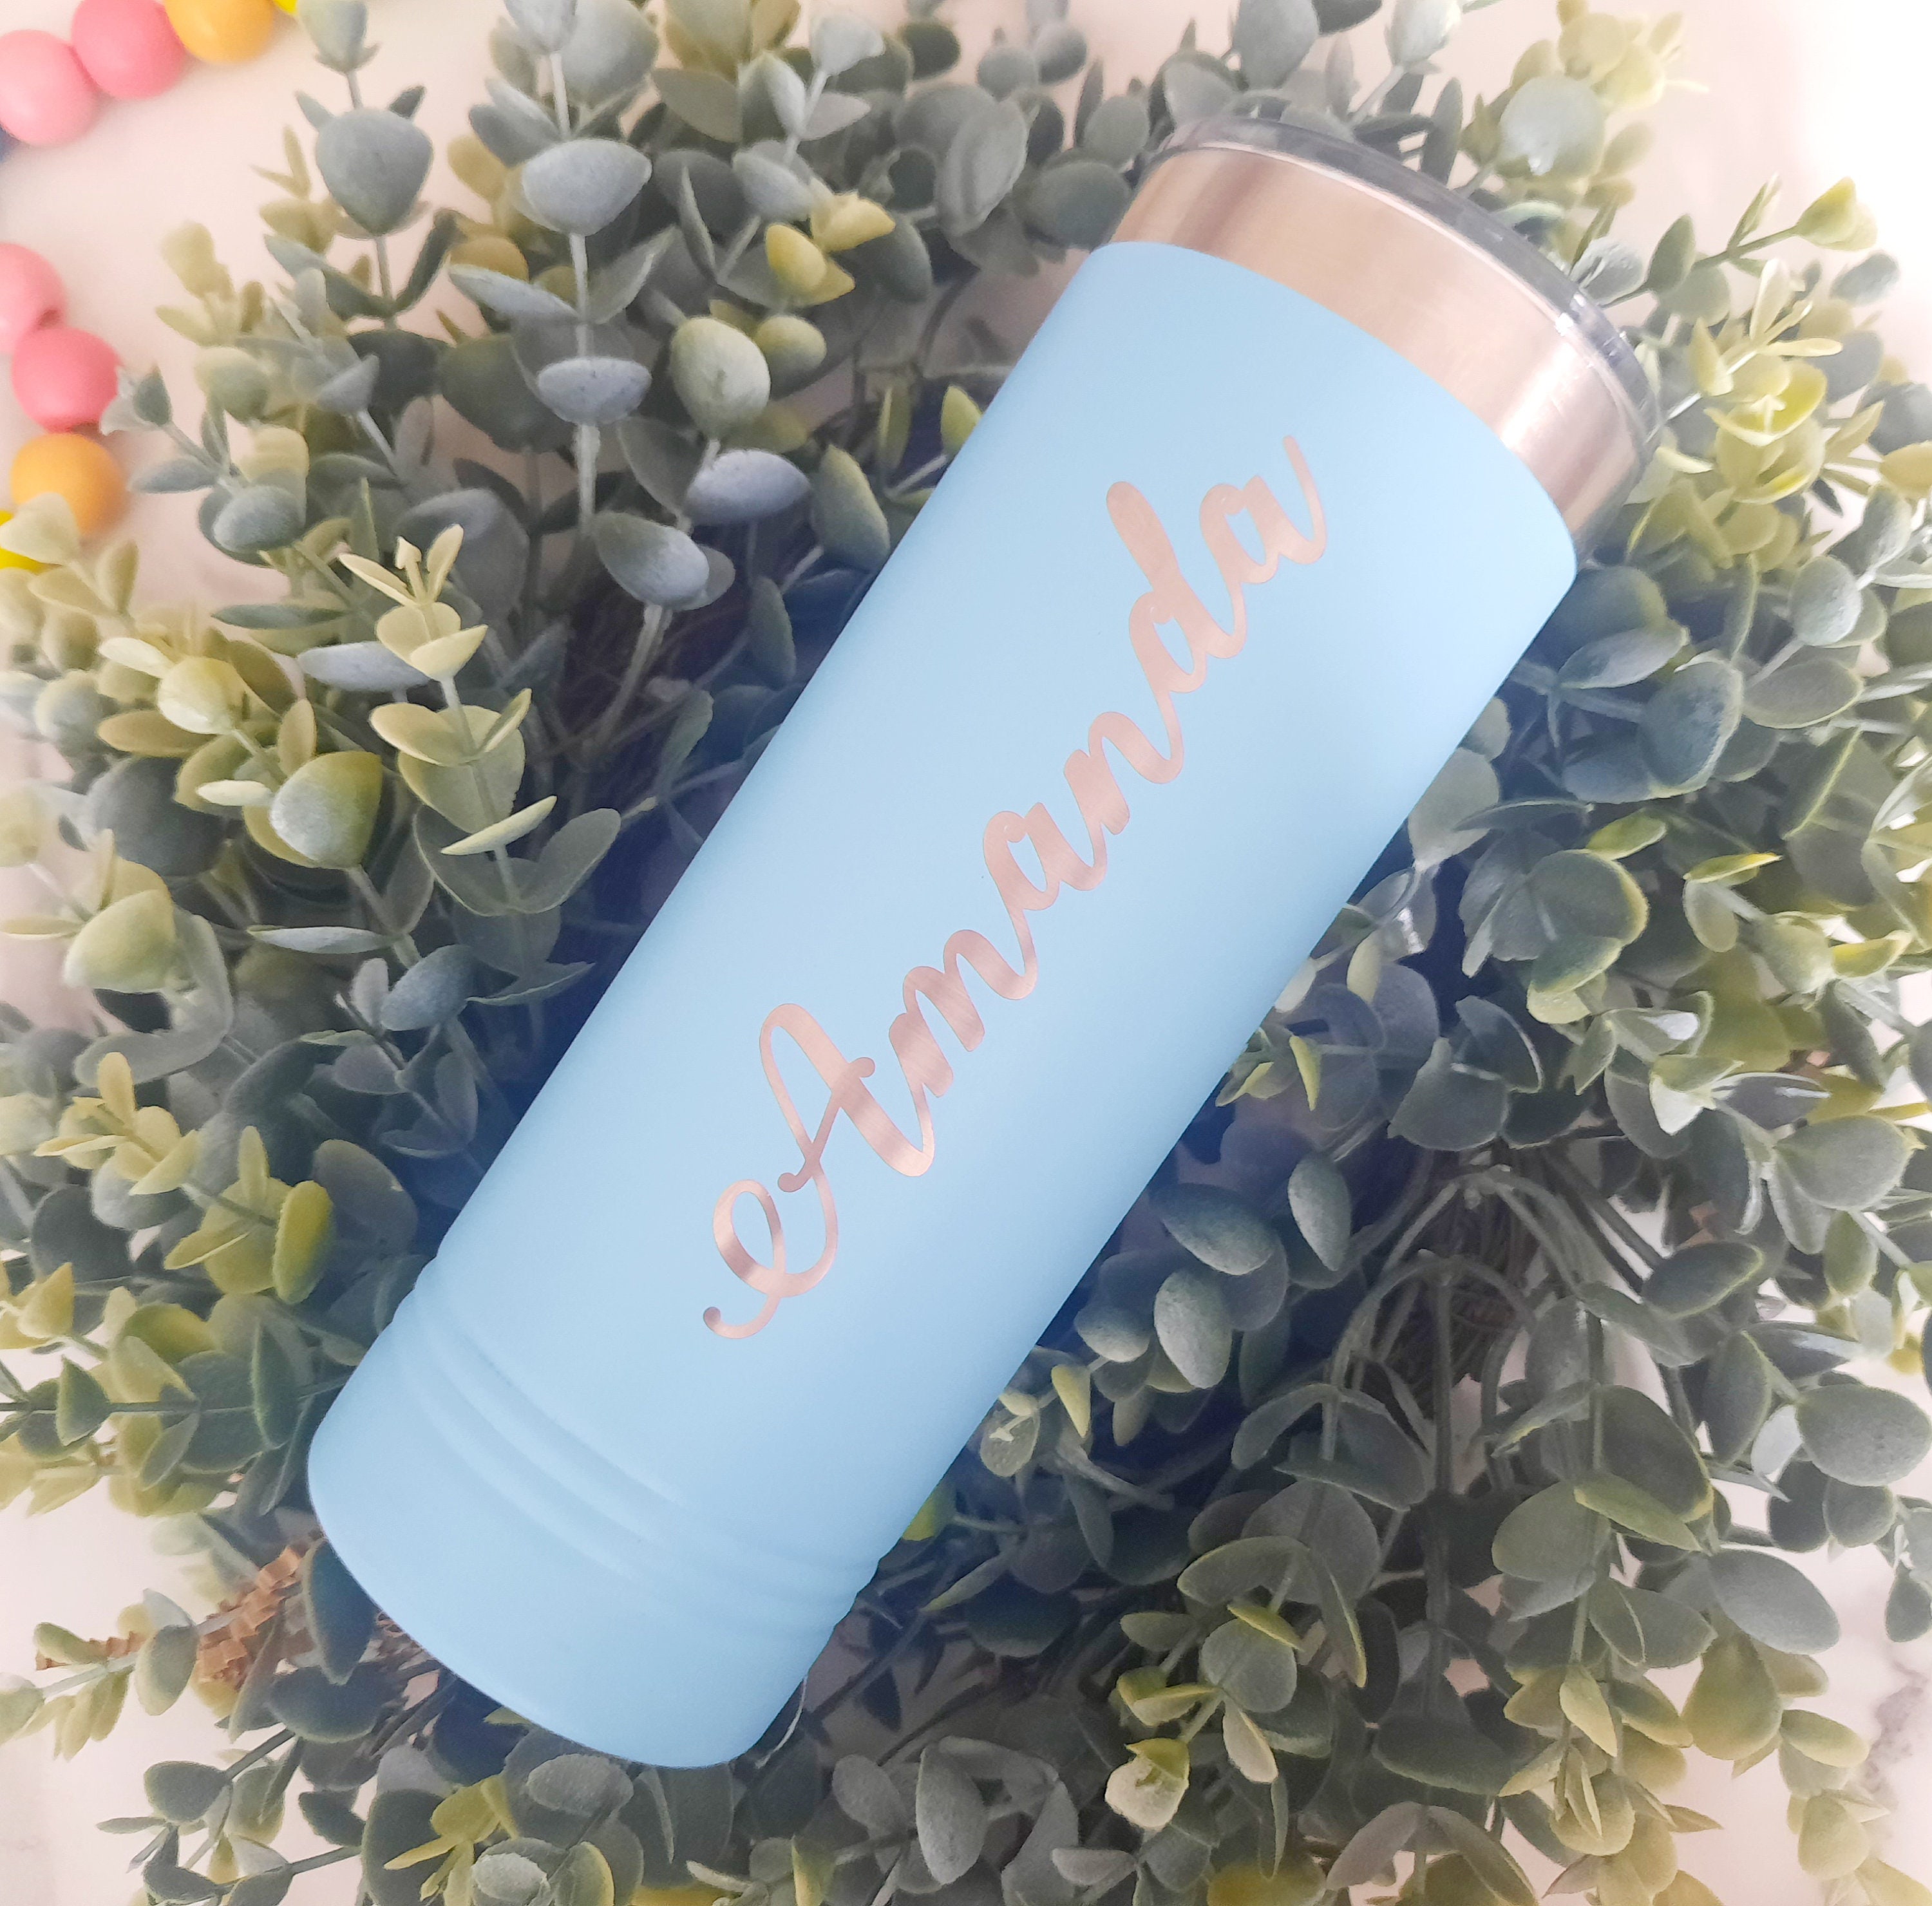 The Personalized Extra-Large Insulated Tumbler Duo